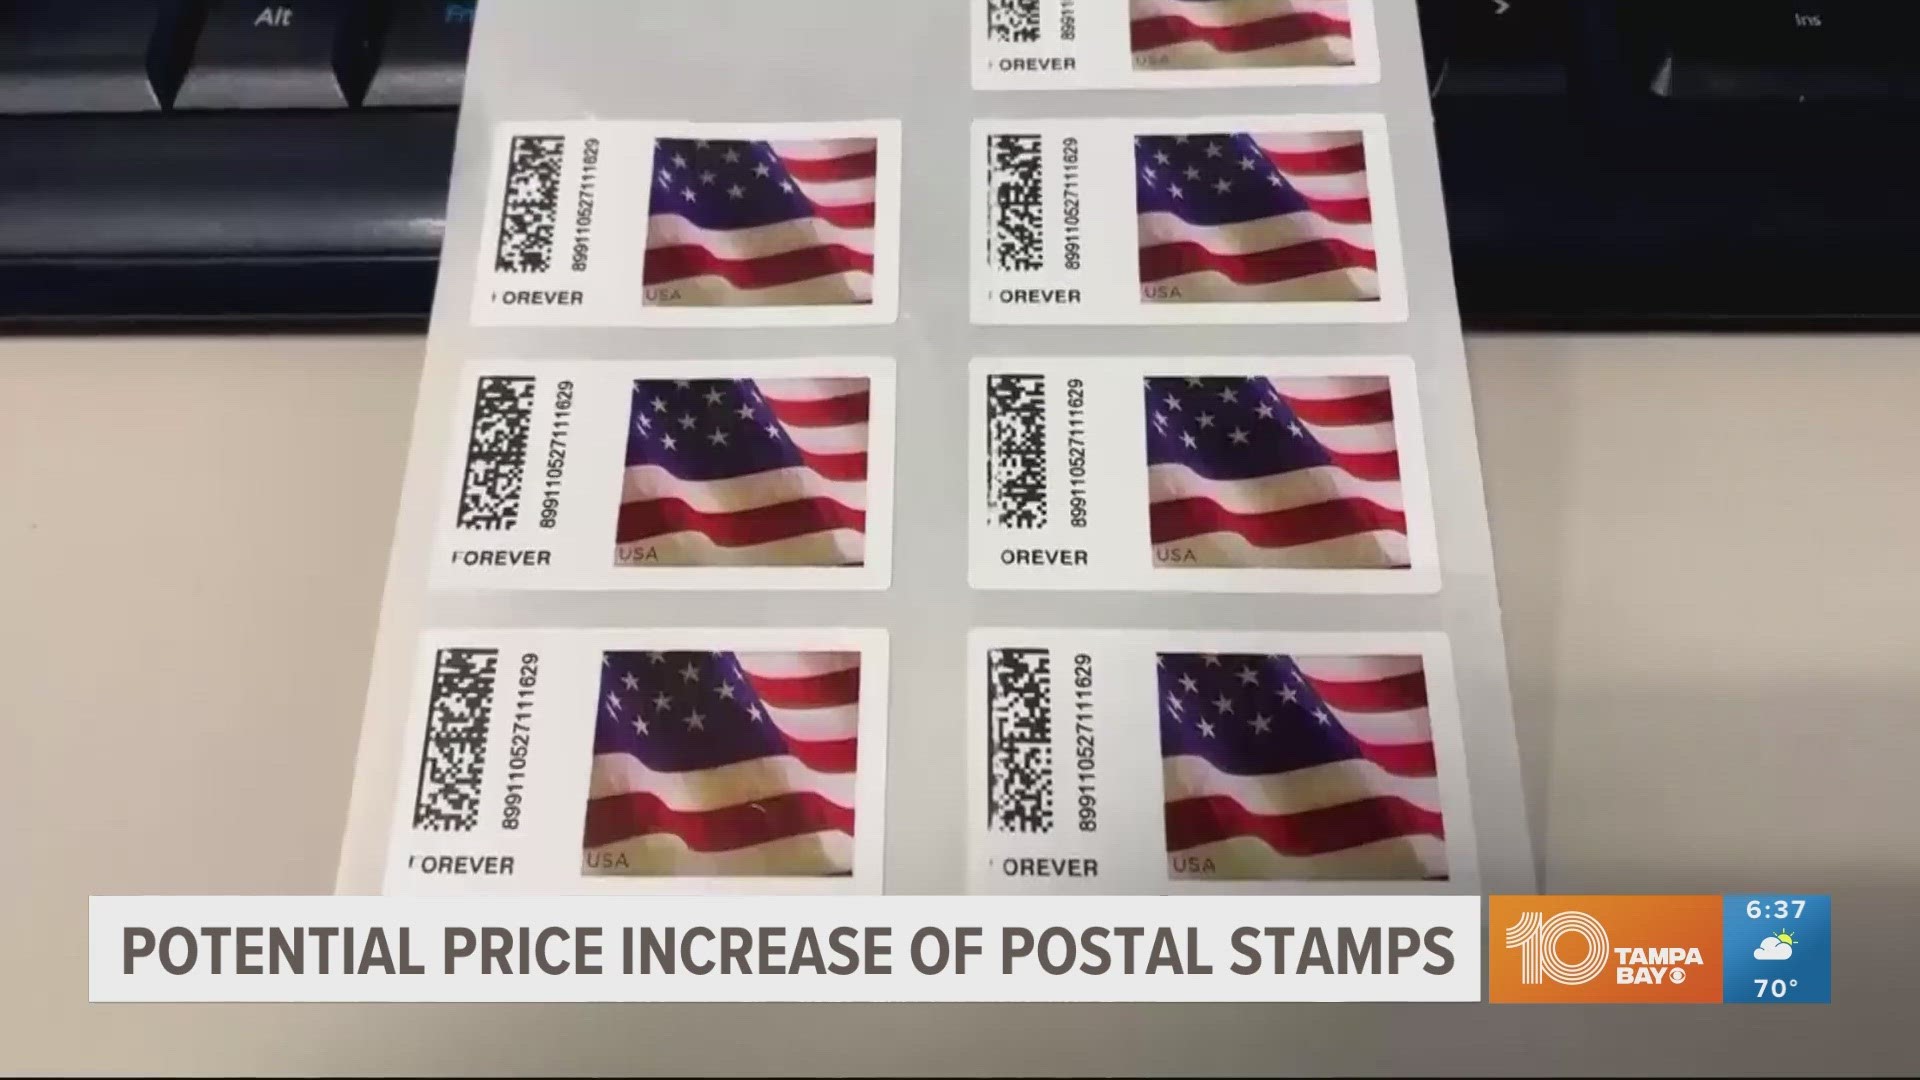 How much does a stamp cost? Postage stamp prices scheduled to